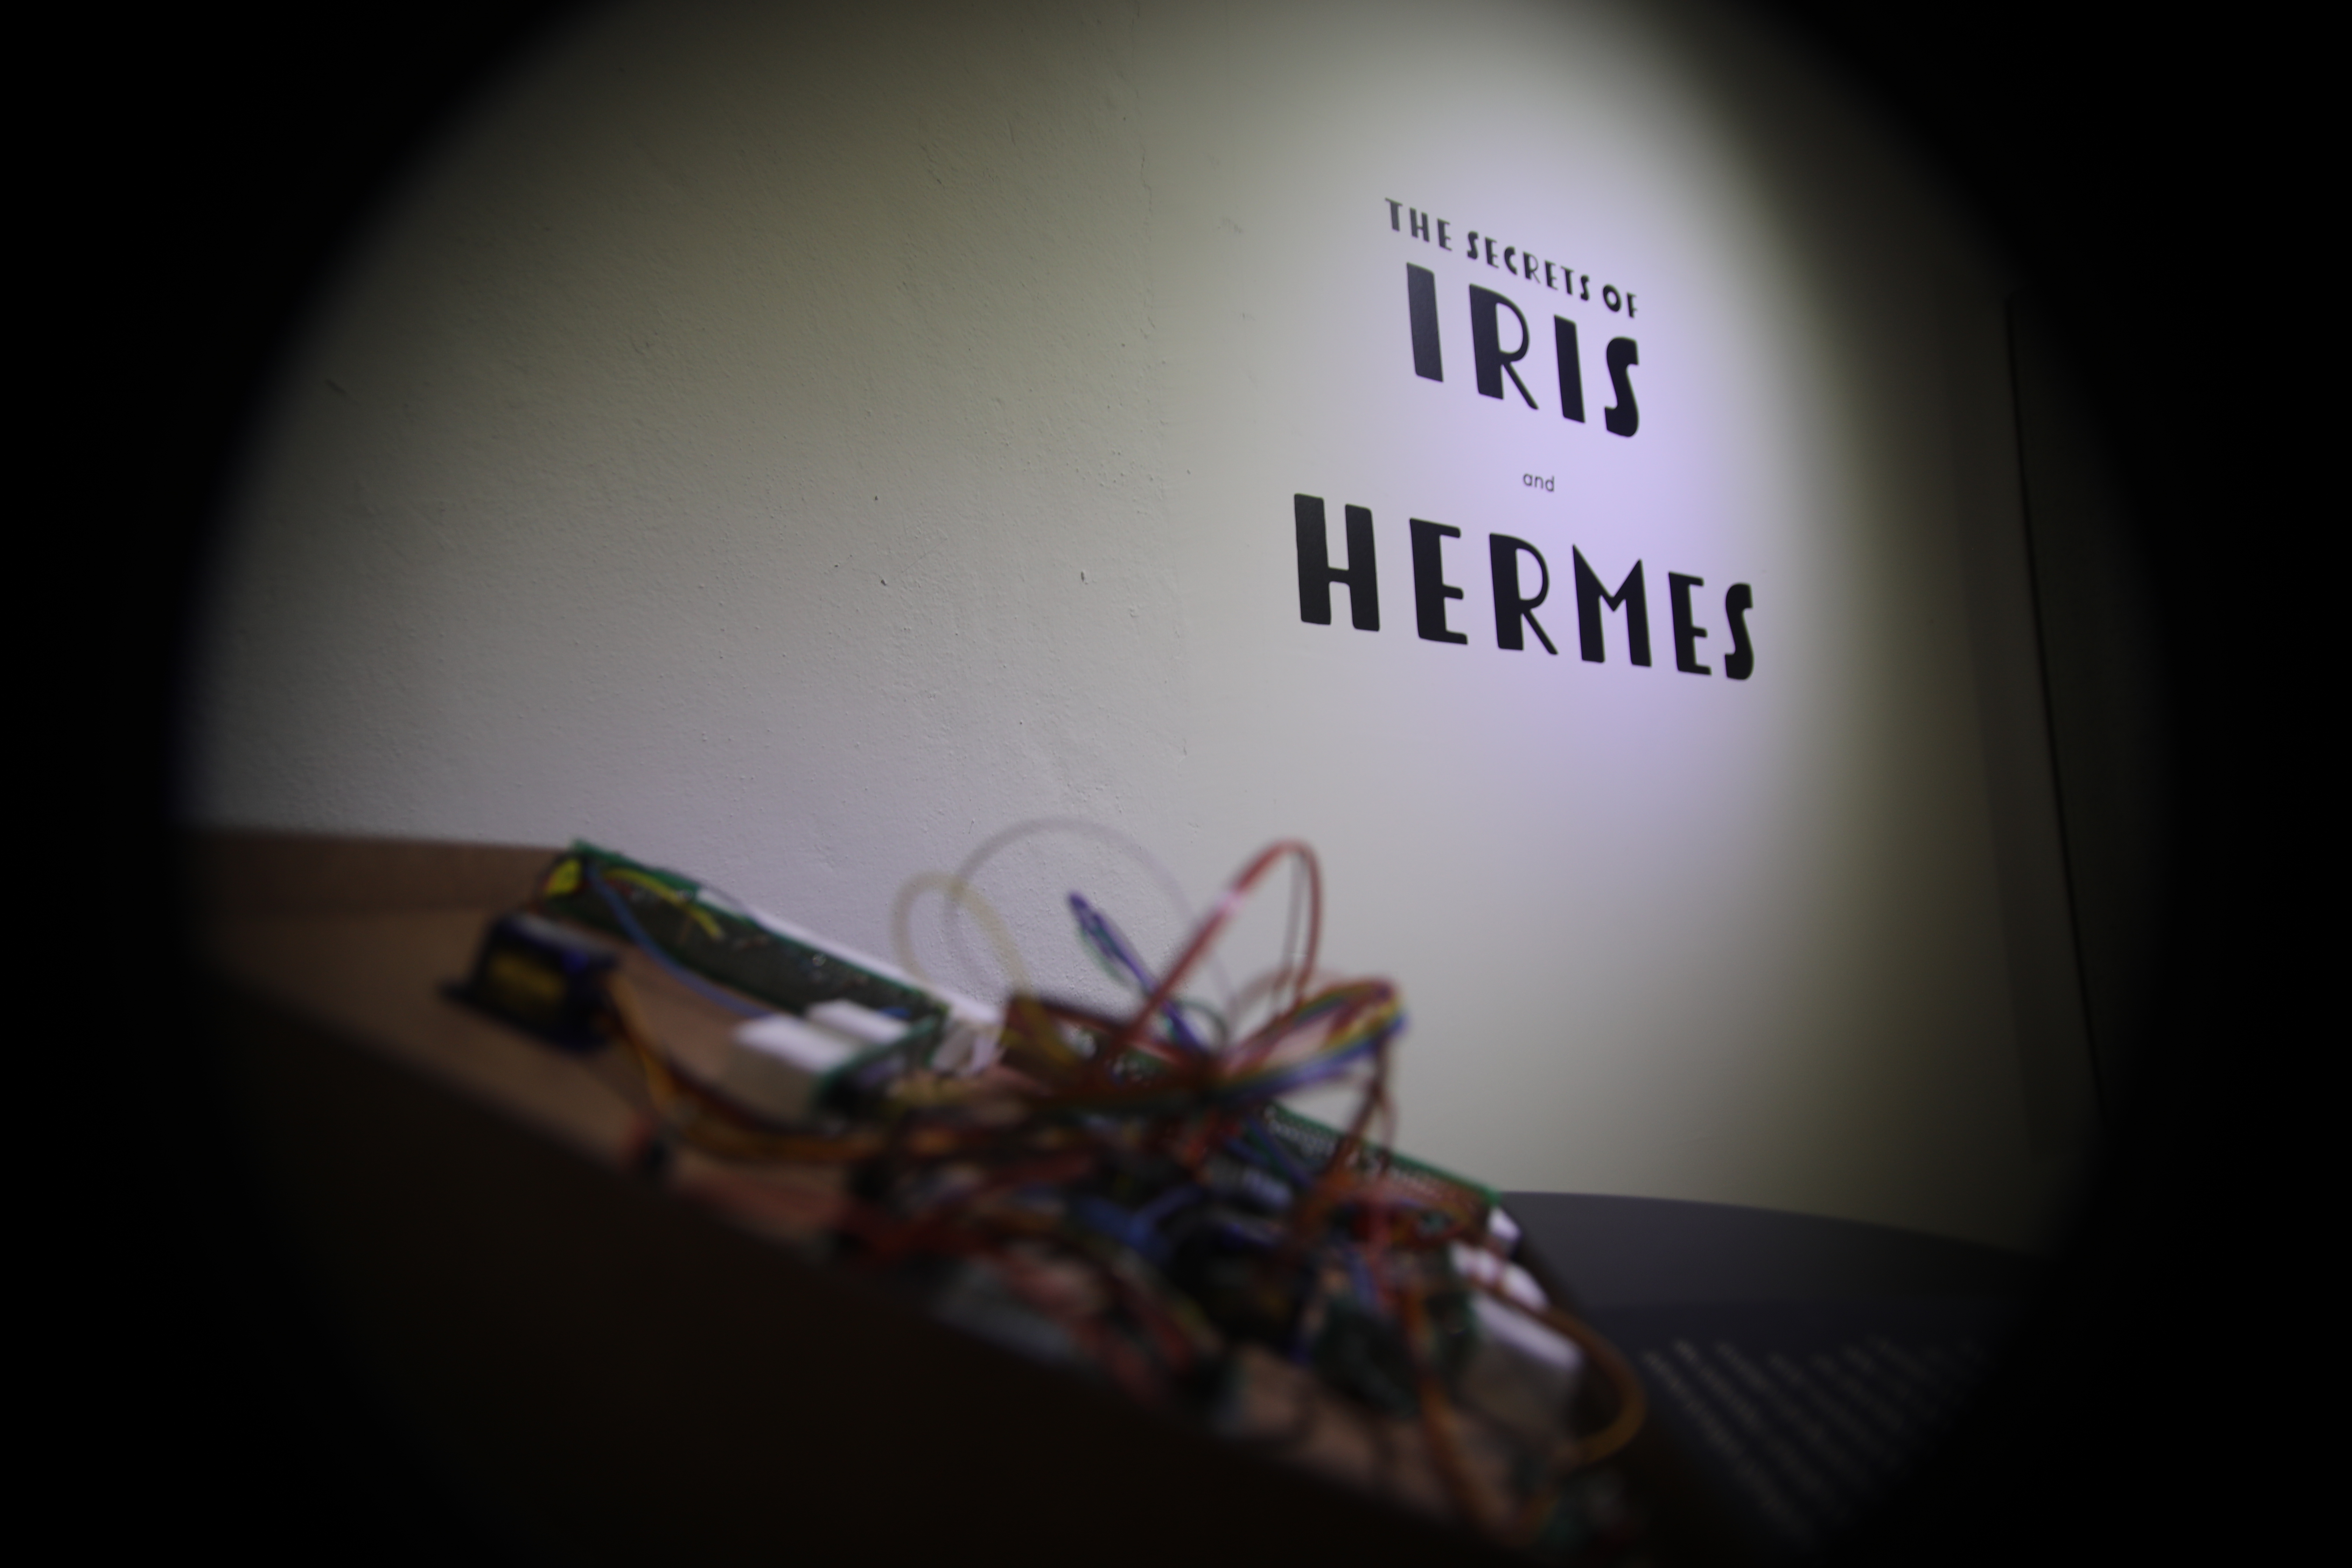 profile image of box with wires with title The secrets of Iris and Hermes in the background 